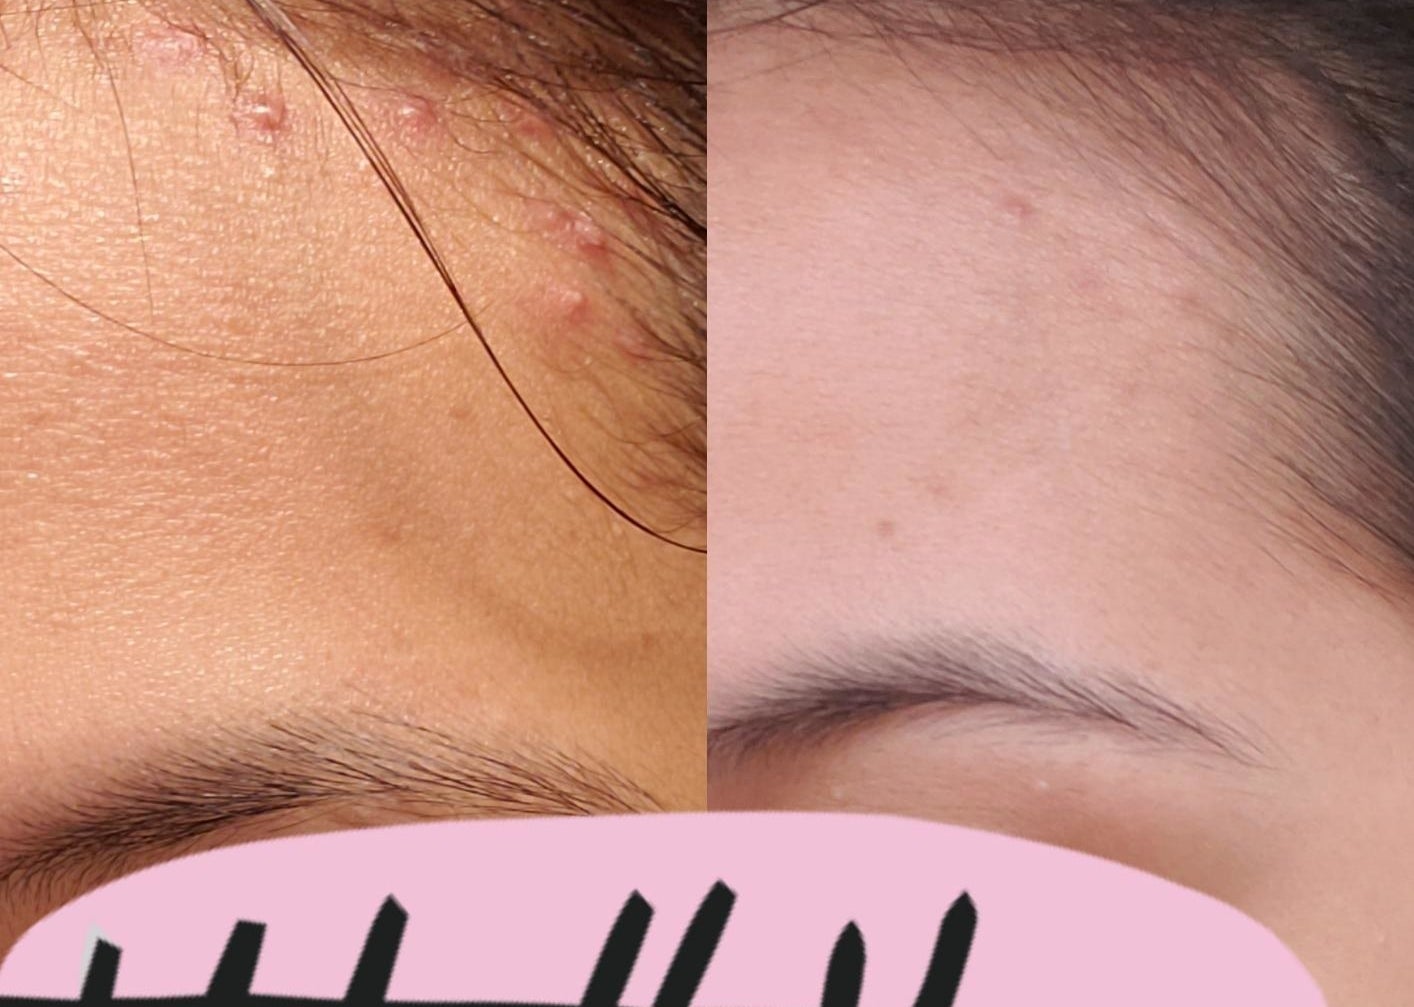 reviewer&#x27;s before and after picture which shows acne on their forehead and then a near-clear forehead